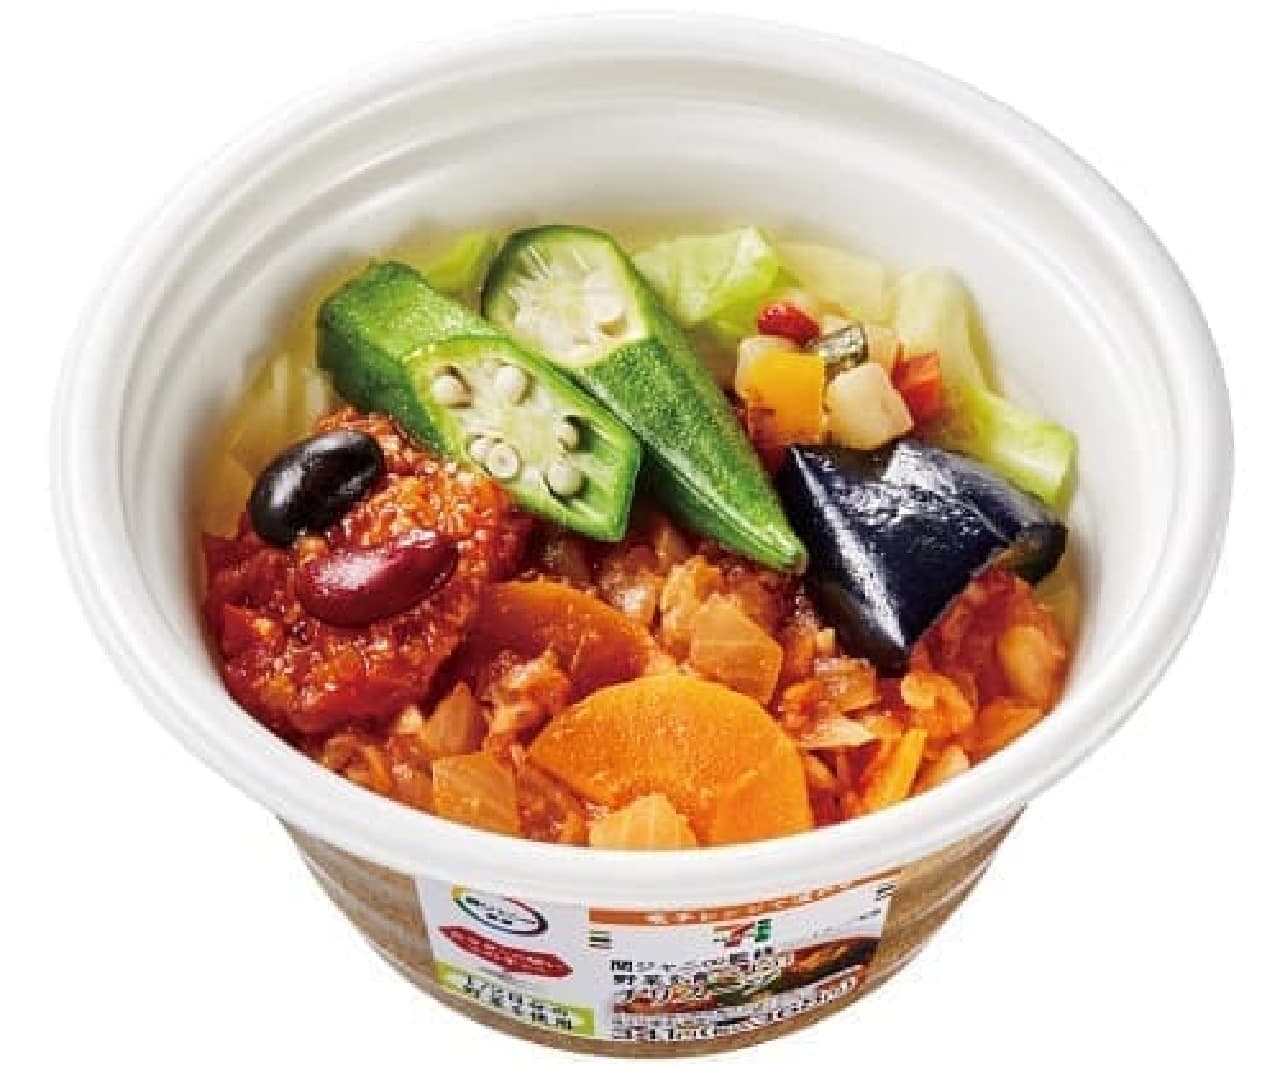 7-ELEVEN "Let's eat vegetables supervised by Kanjani Eight! Chili soup"